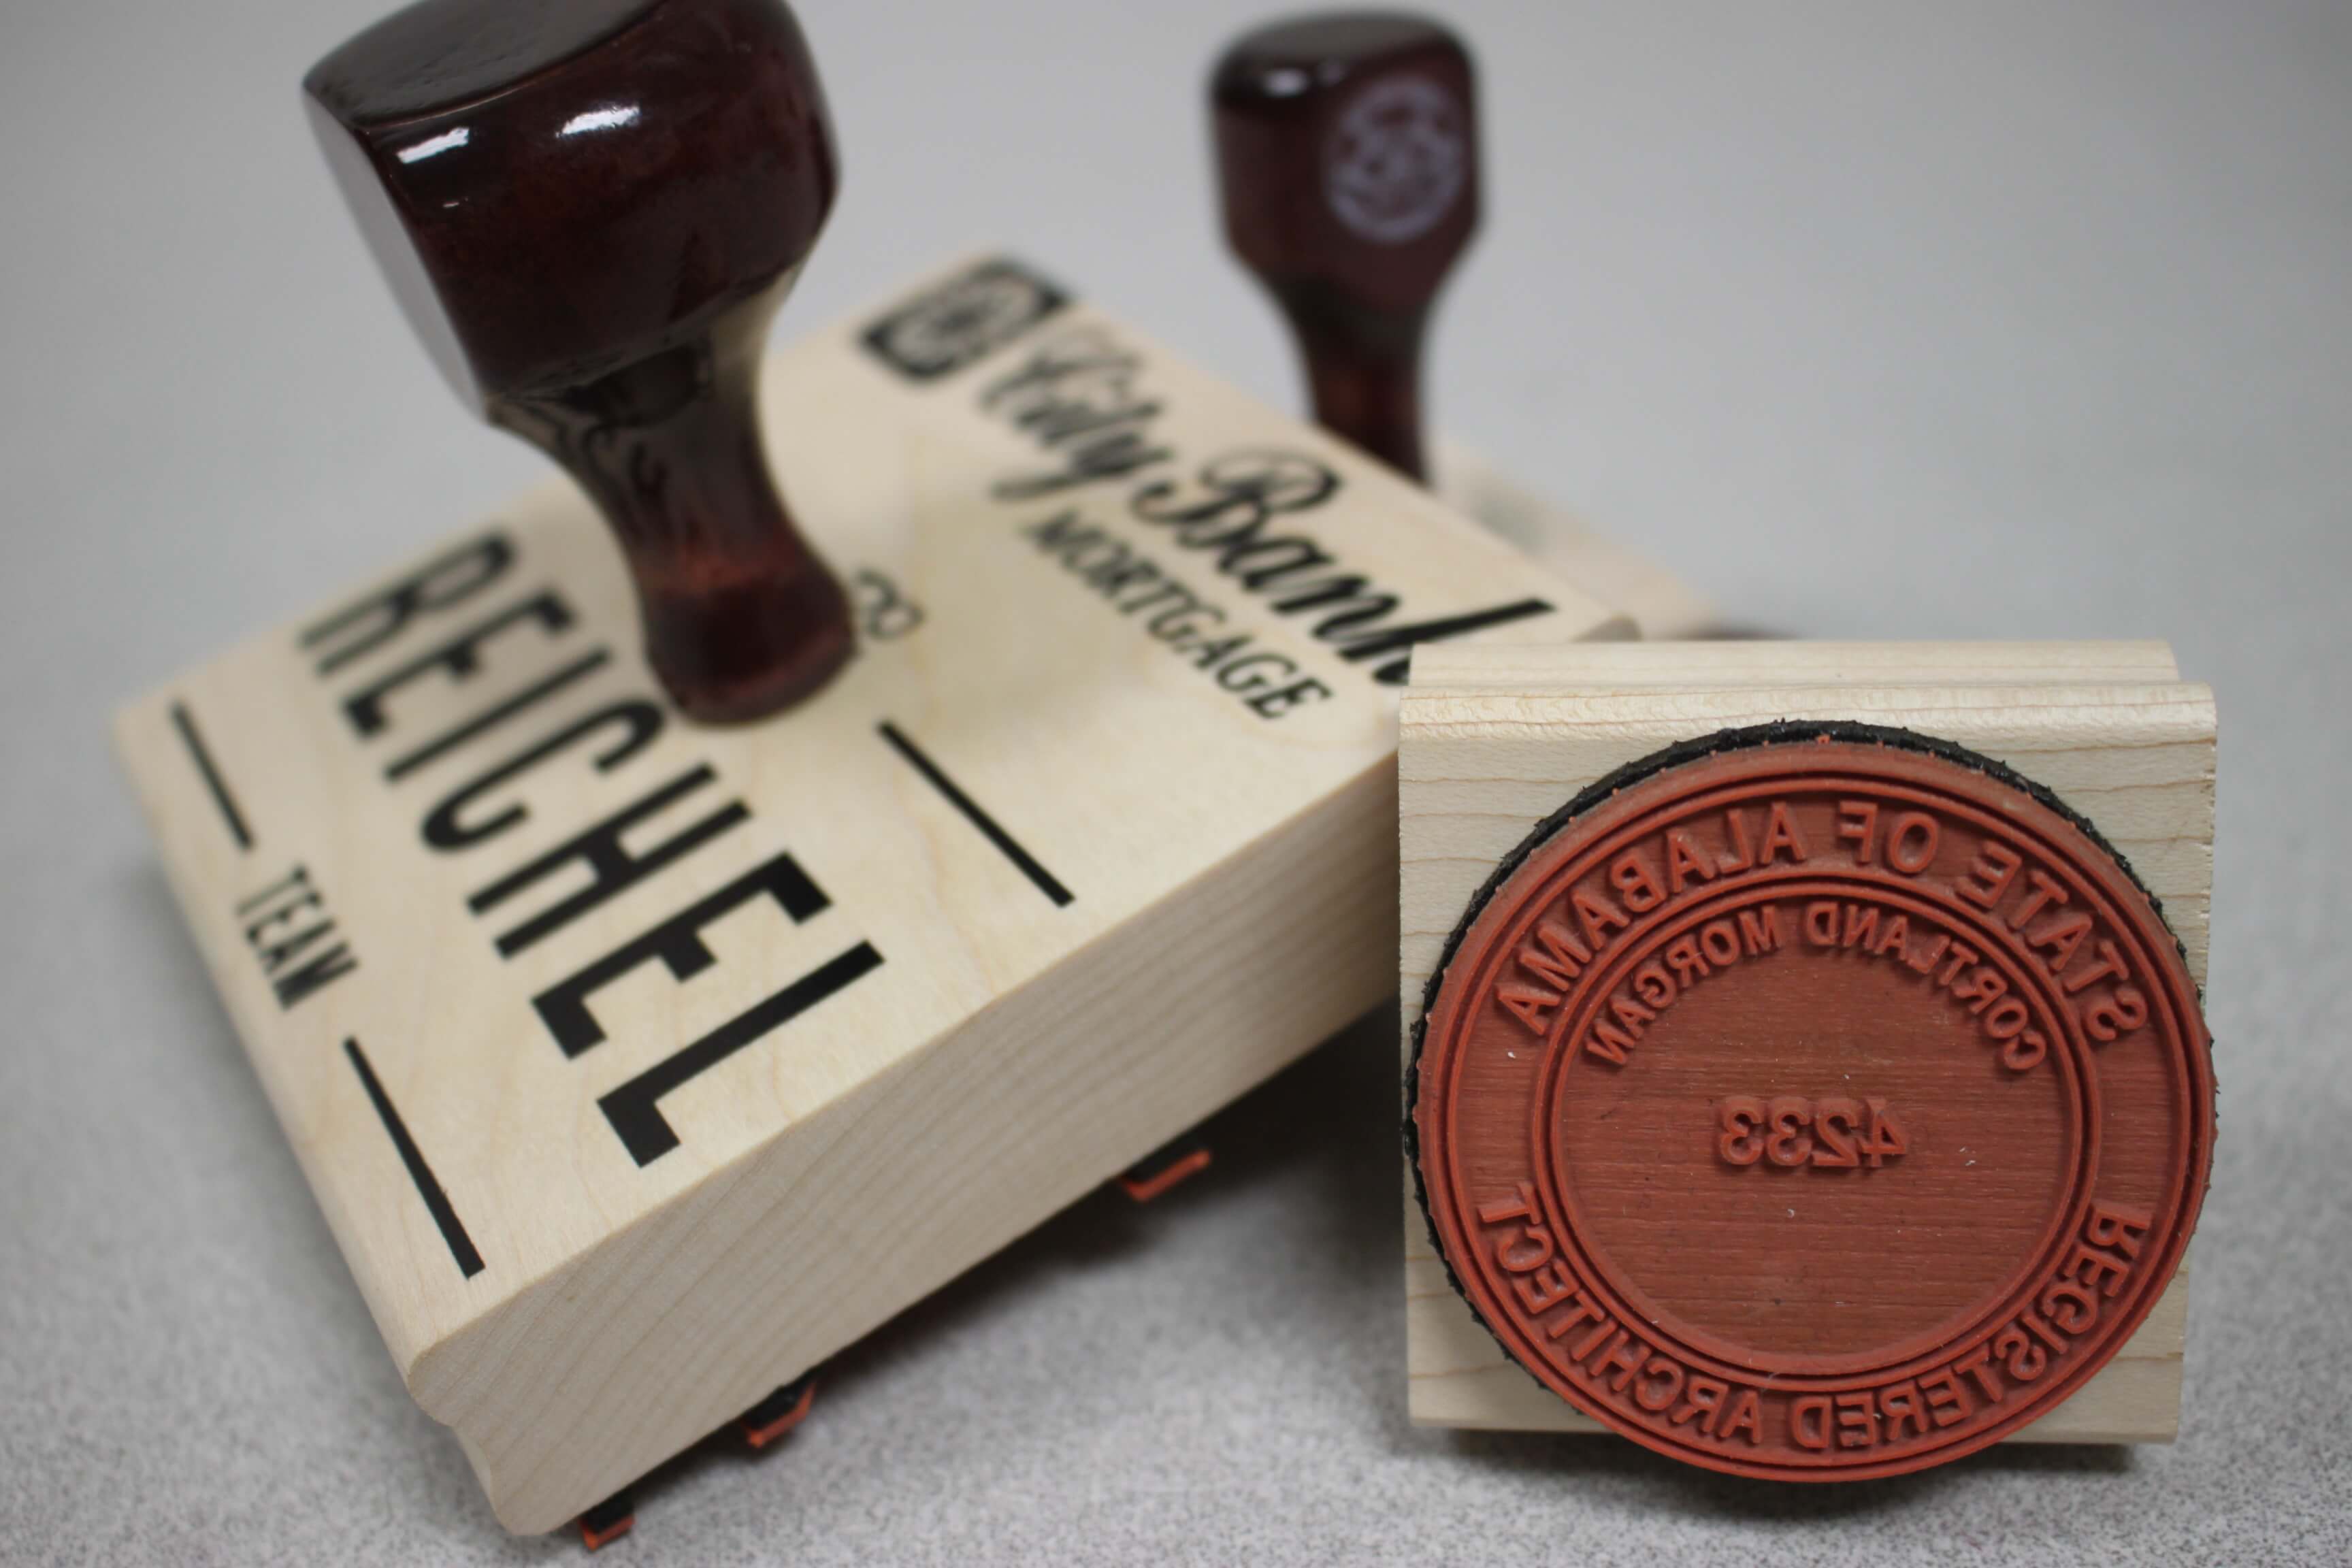 Fred Lake connects people with stamps, embossers, and other desk products. Purchase your 2-in. Round Logo Rubber Stamp right here.